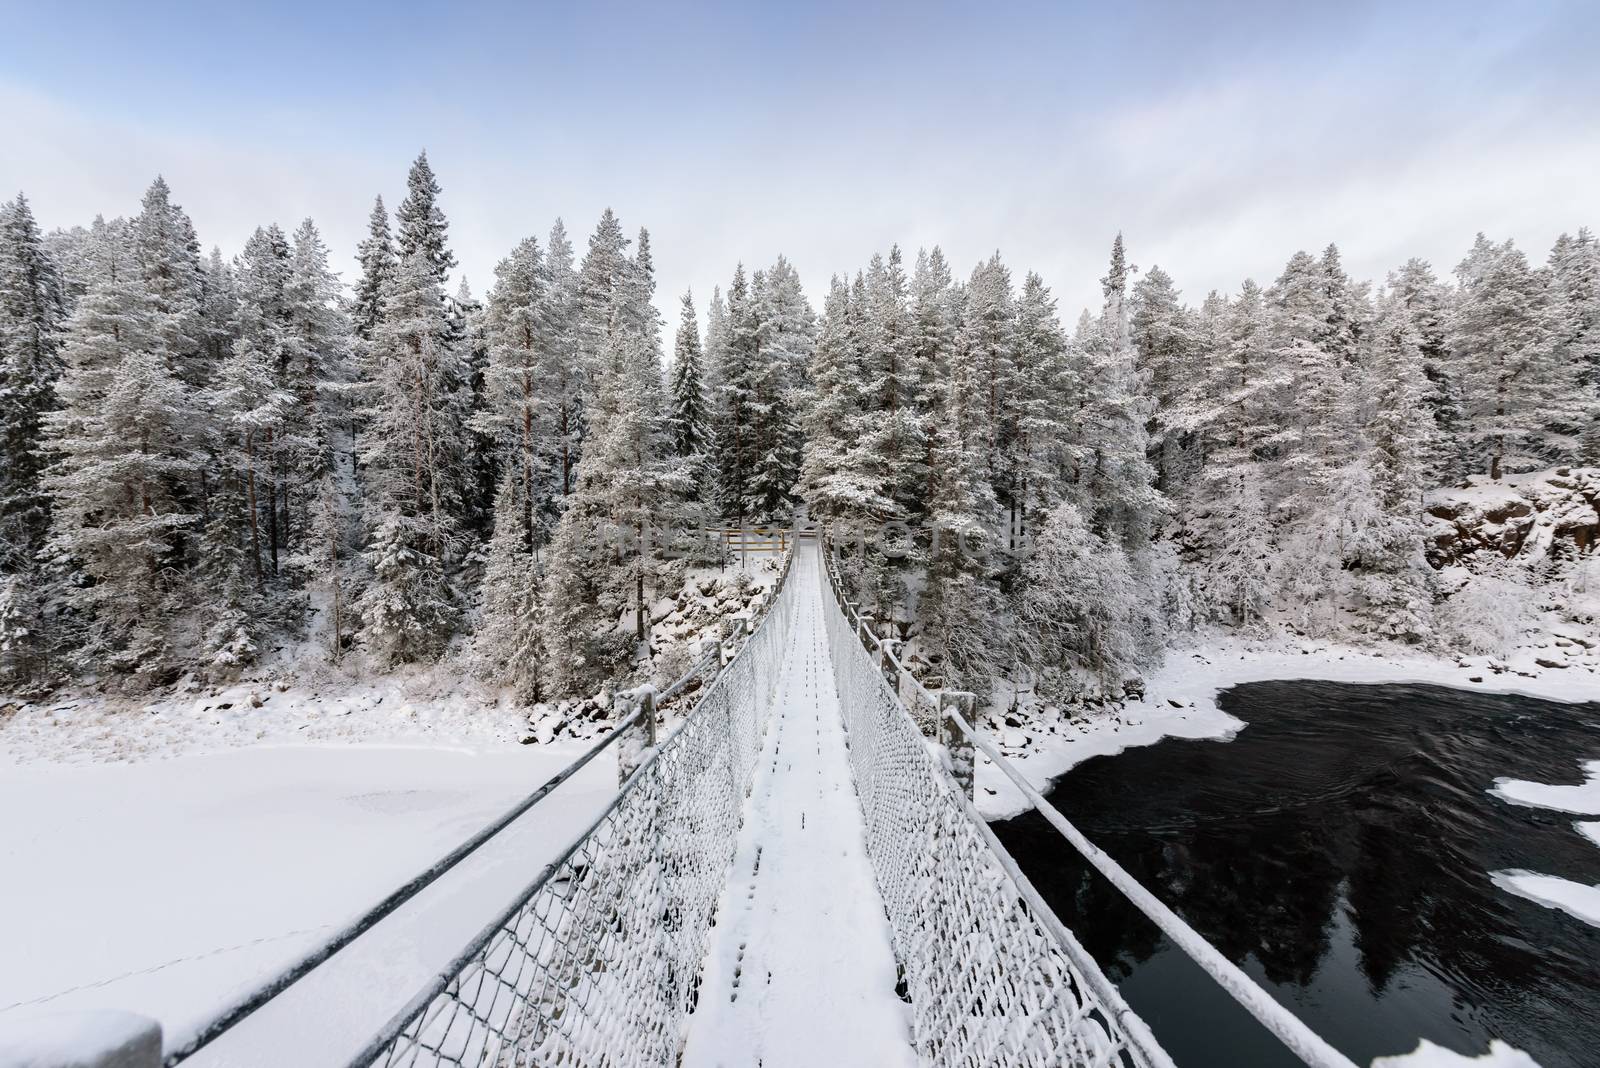 The bridge has covered with heavy snow and sky in winter season  by animagesdesign